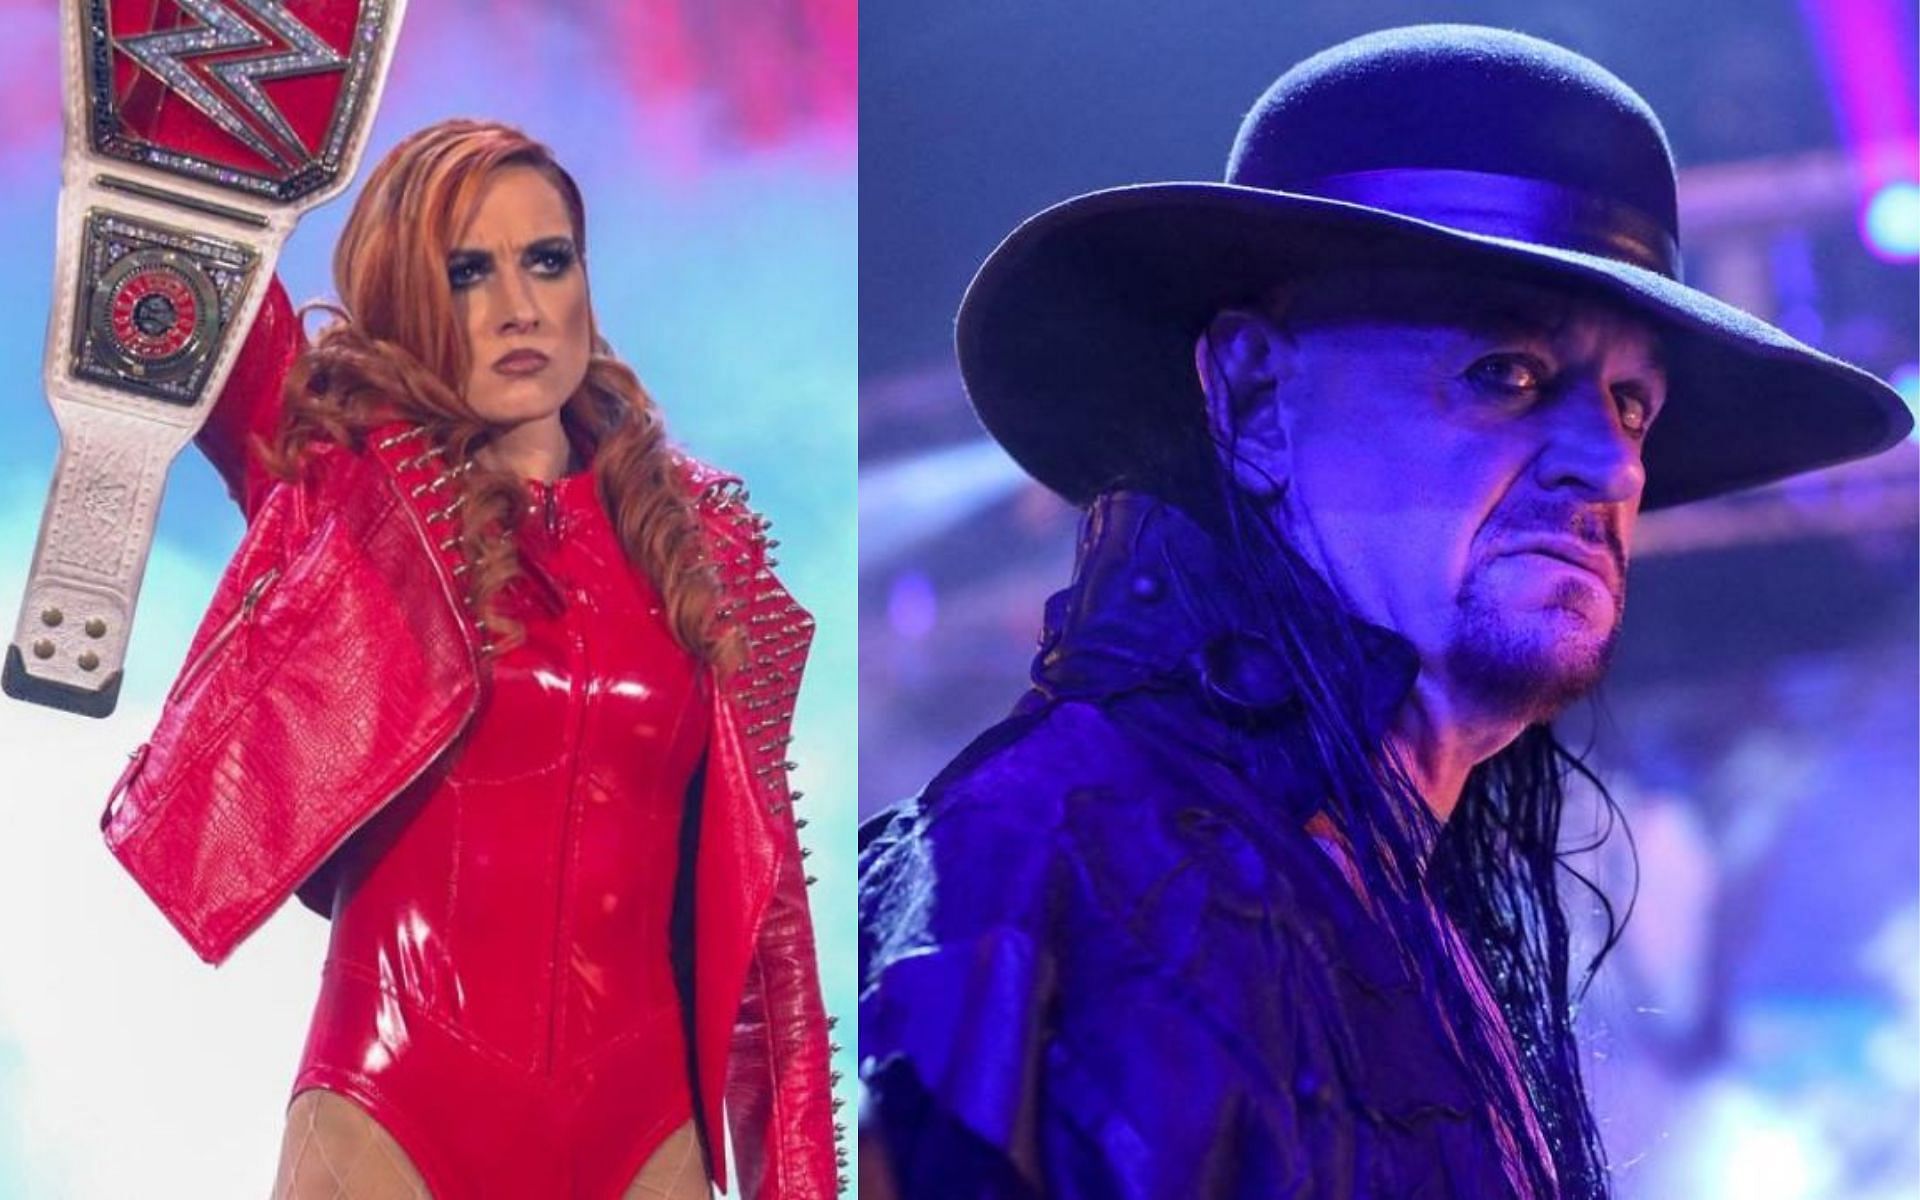 Becky Lynch and The Undertaker